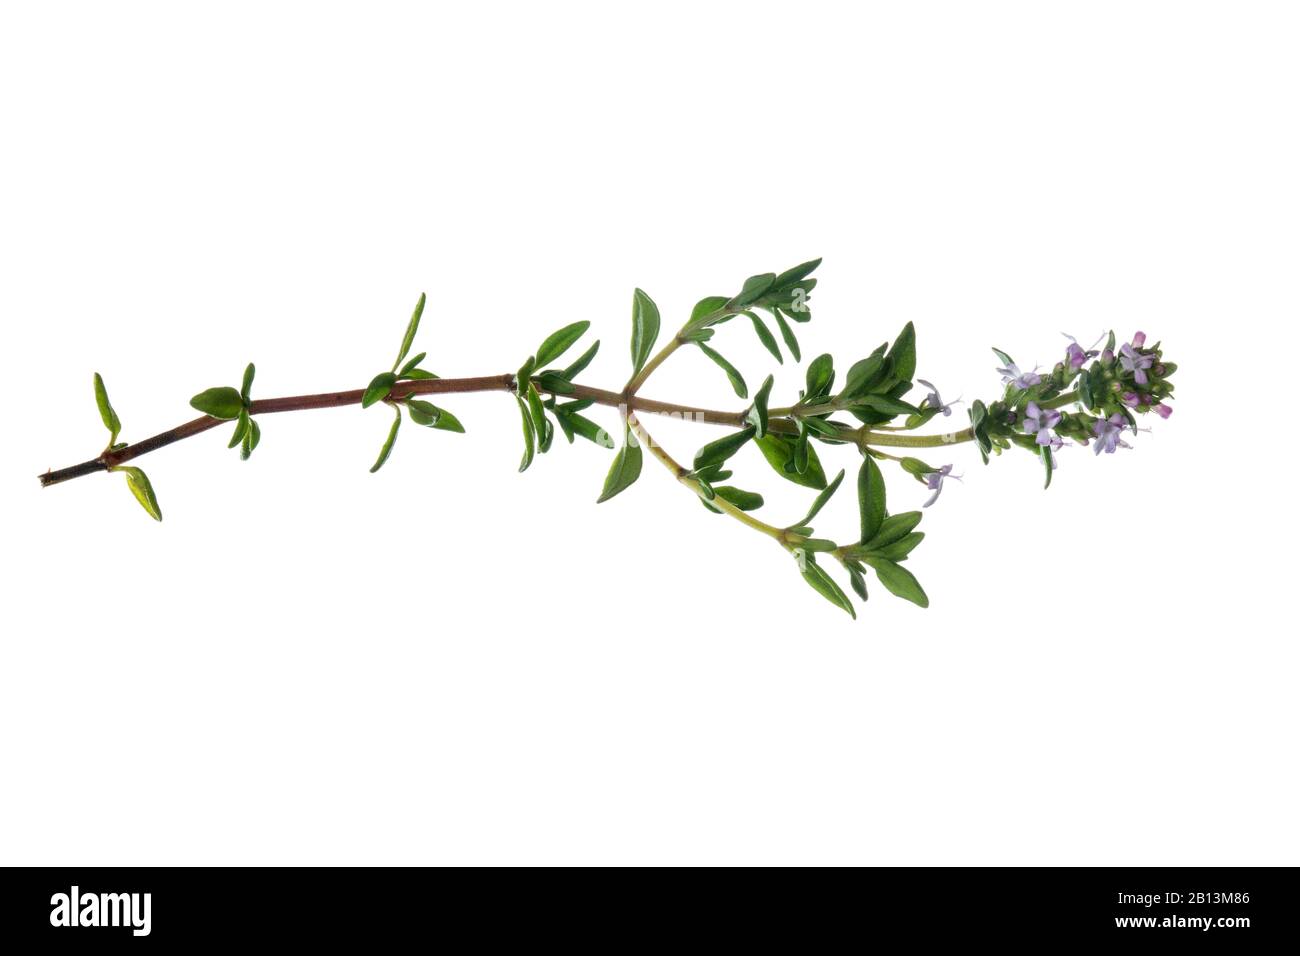 Garden thyme, English thyme, Common thyme (Thymus vulgaris), blooming twig, cutout with ruler Stock Photo